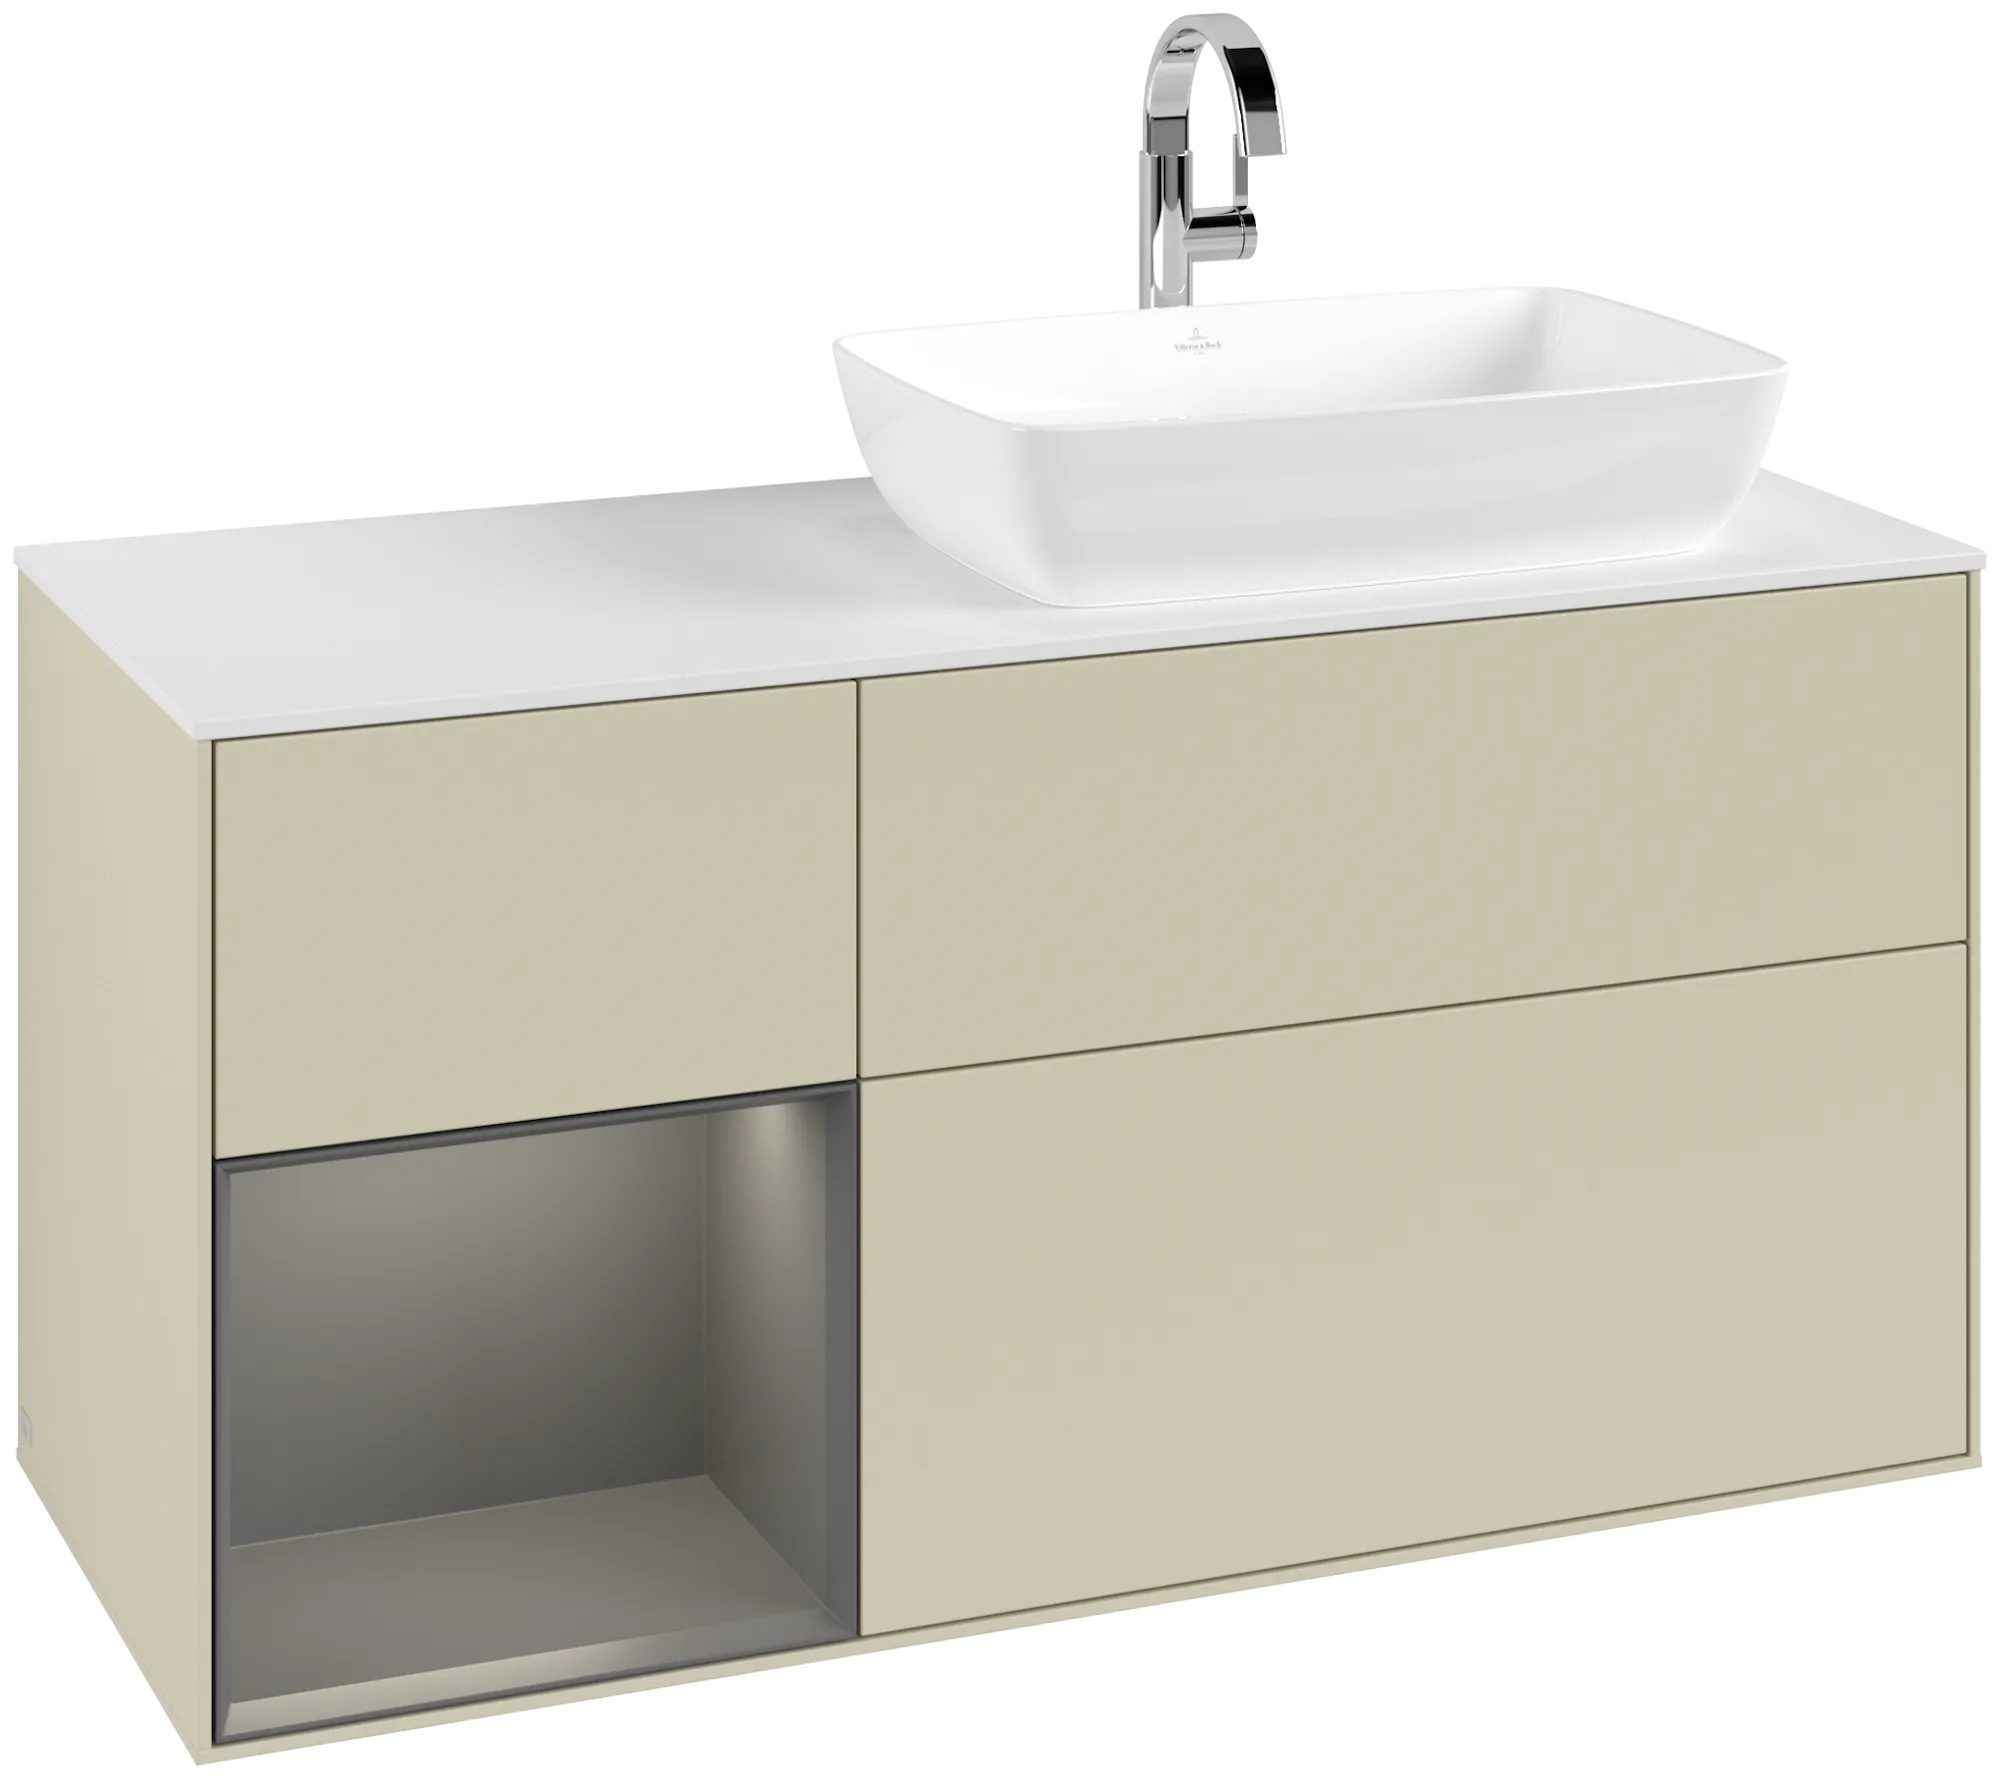 Picture of VILLEROY BOCH Finion Vanity unit, with lighting, 3 pull-out compartments, 1200 x 603 x 501 mm, Silk Grey Matt Lacquer / Anthracite Matt Lacquer / Glass White Matt #G801GKHJ